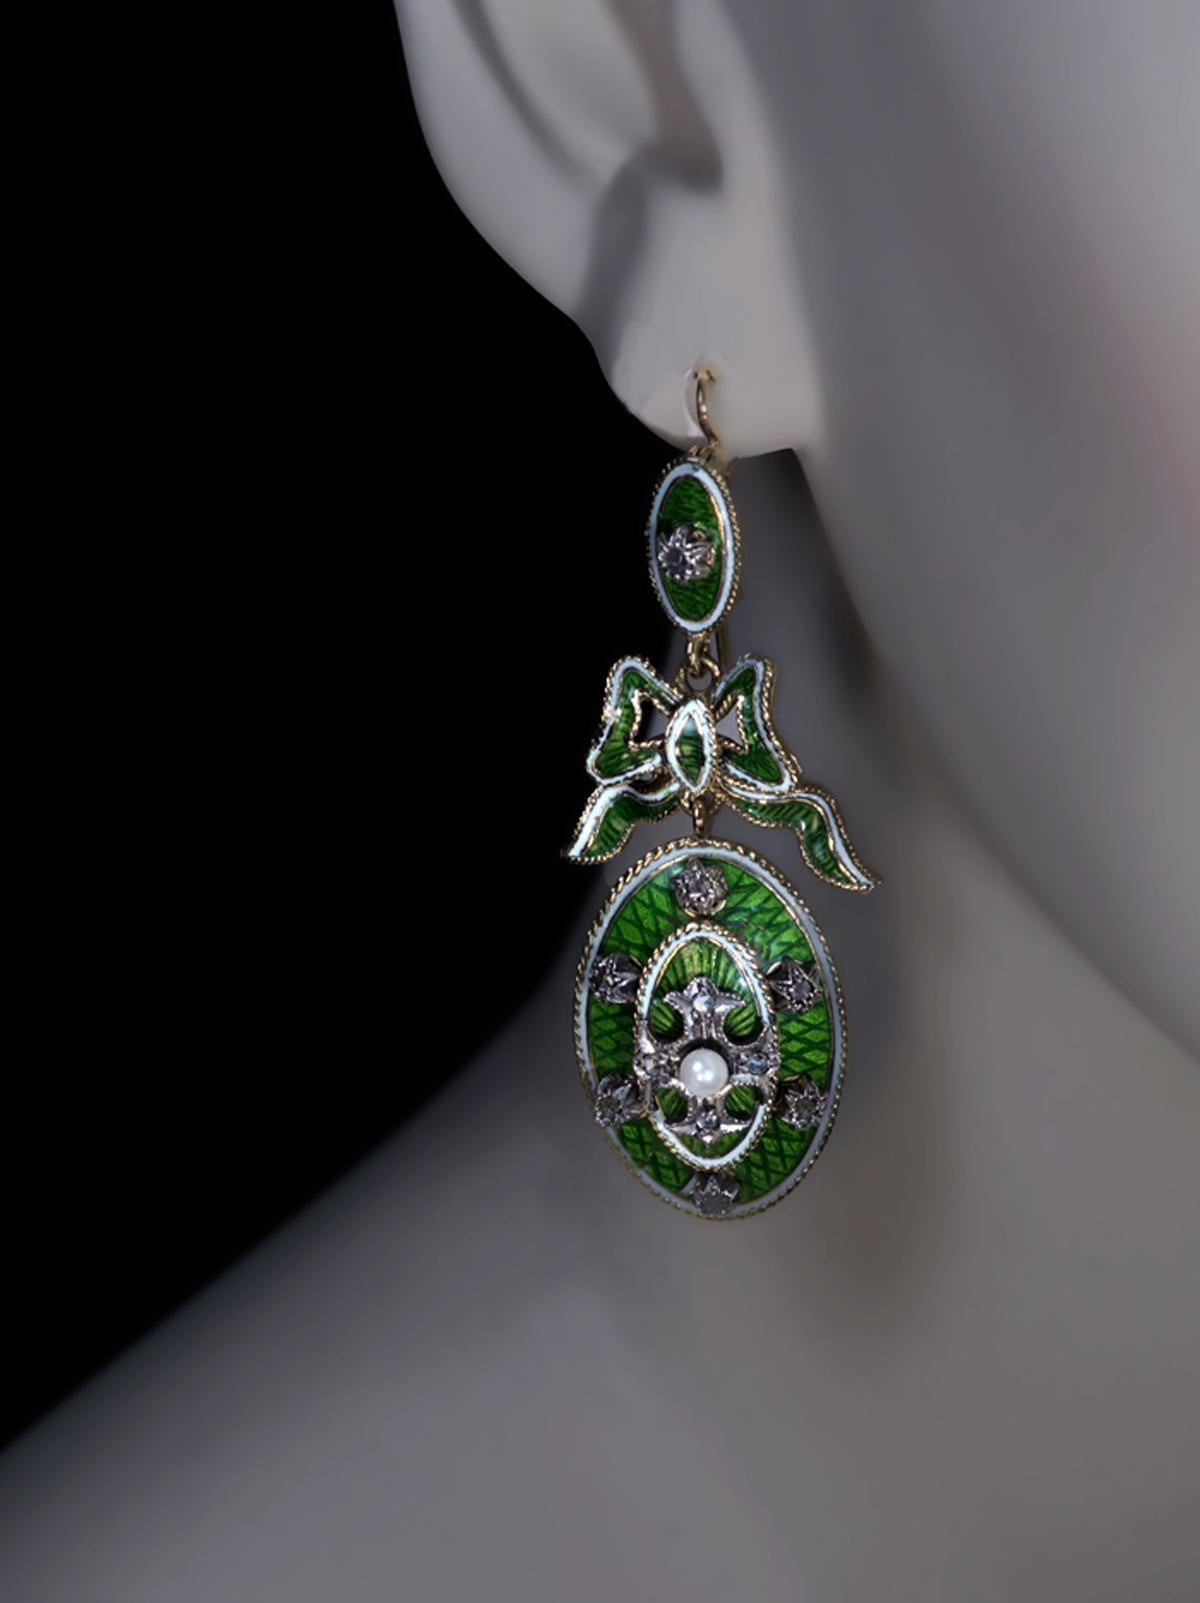 Circa 1890

This magnificent pair of Belle Époque antique 14K gold earrings of cross, star and bow motif features fine quality green guilloche and white opaque enamels. The earrings are further embellished with two pearls and 22 rose cut diamonds